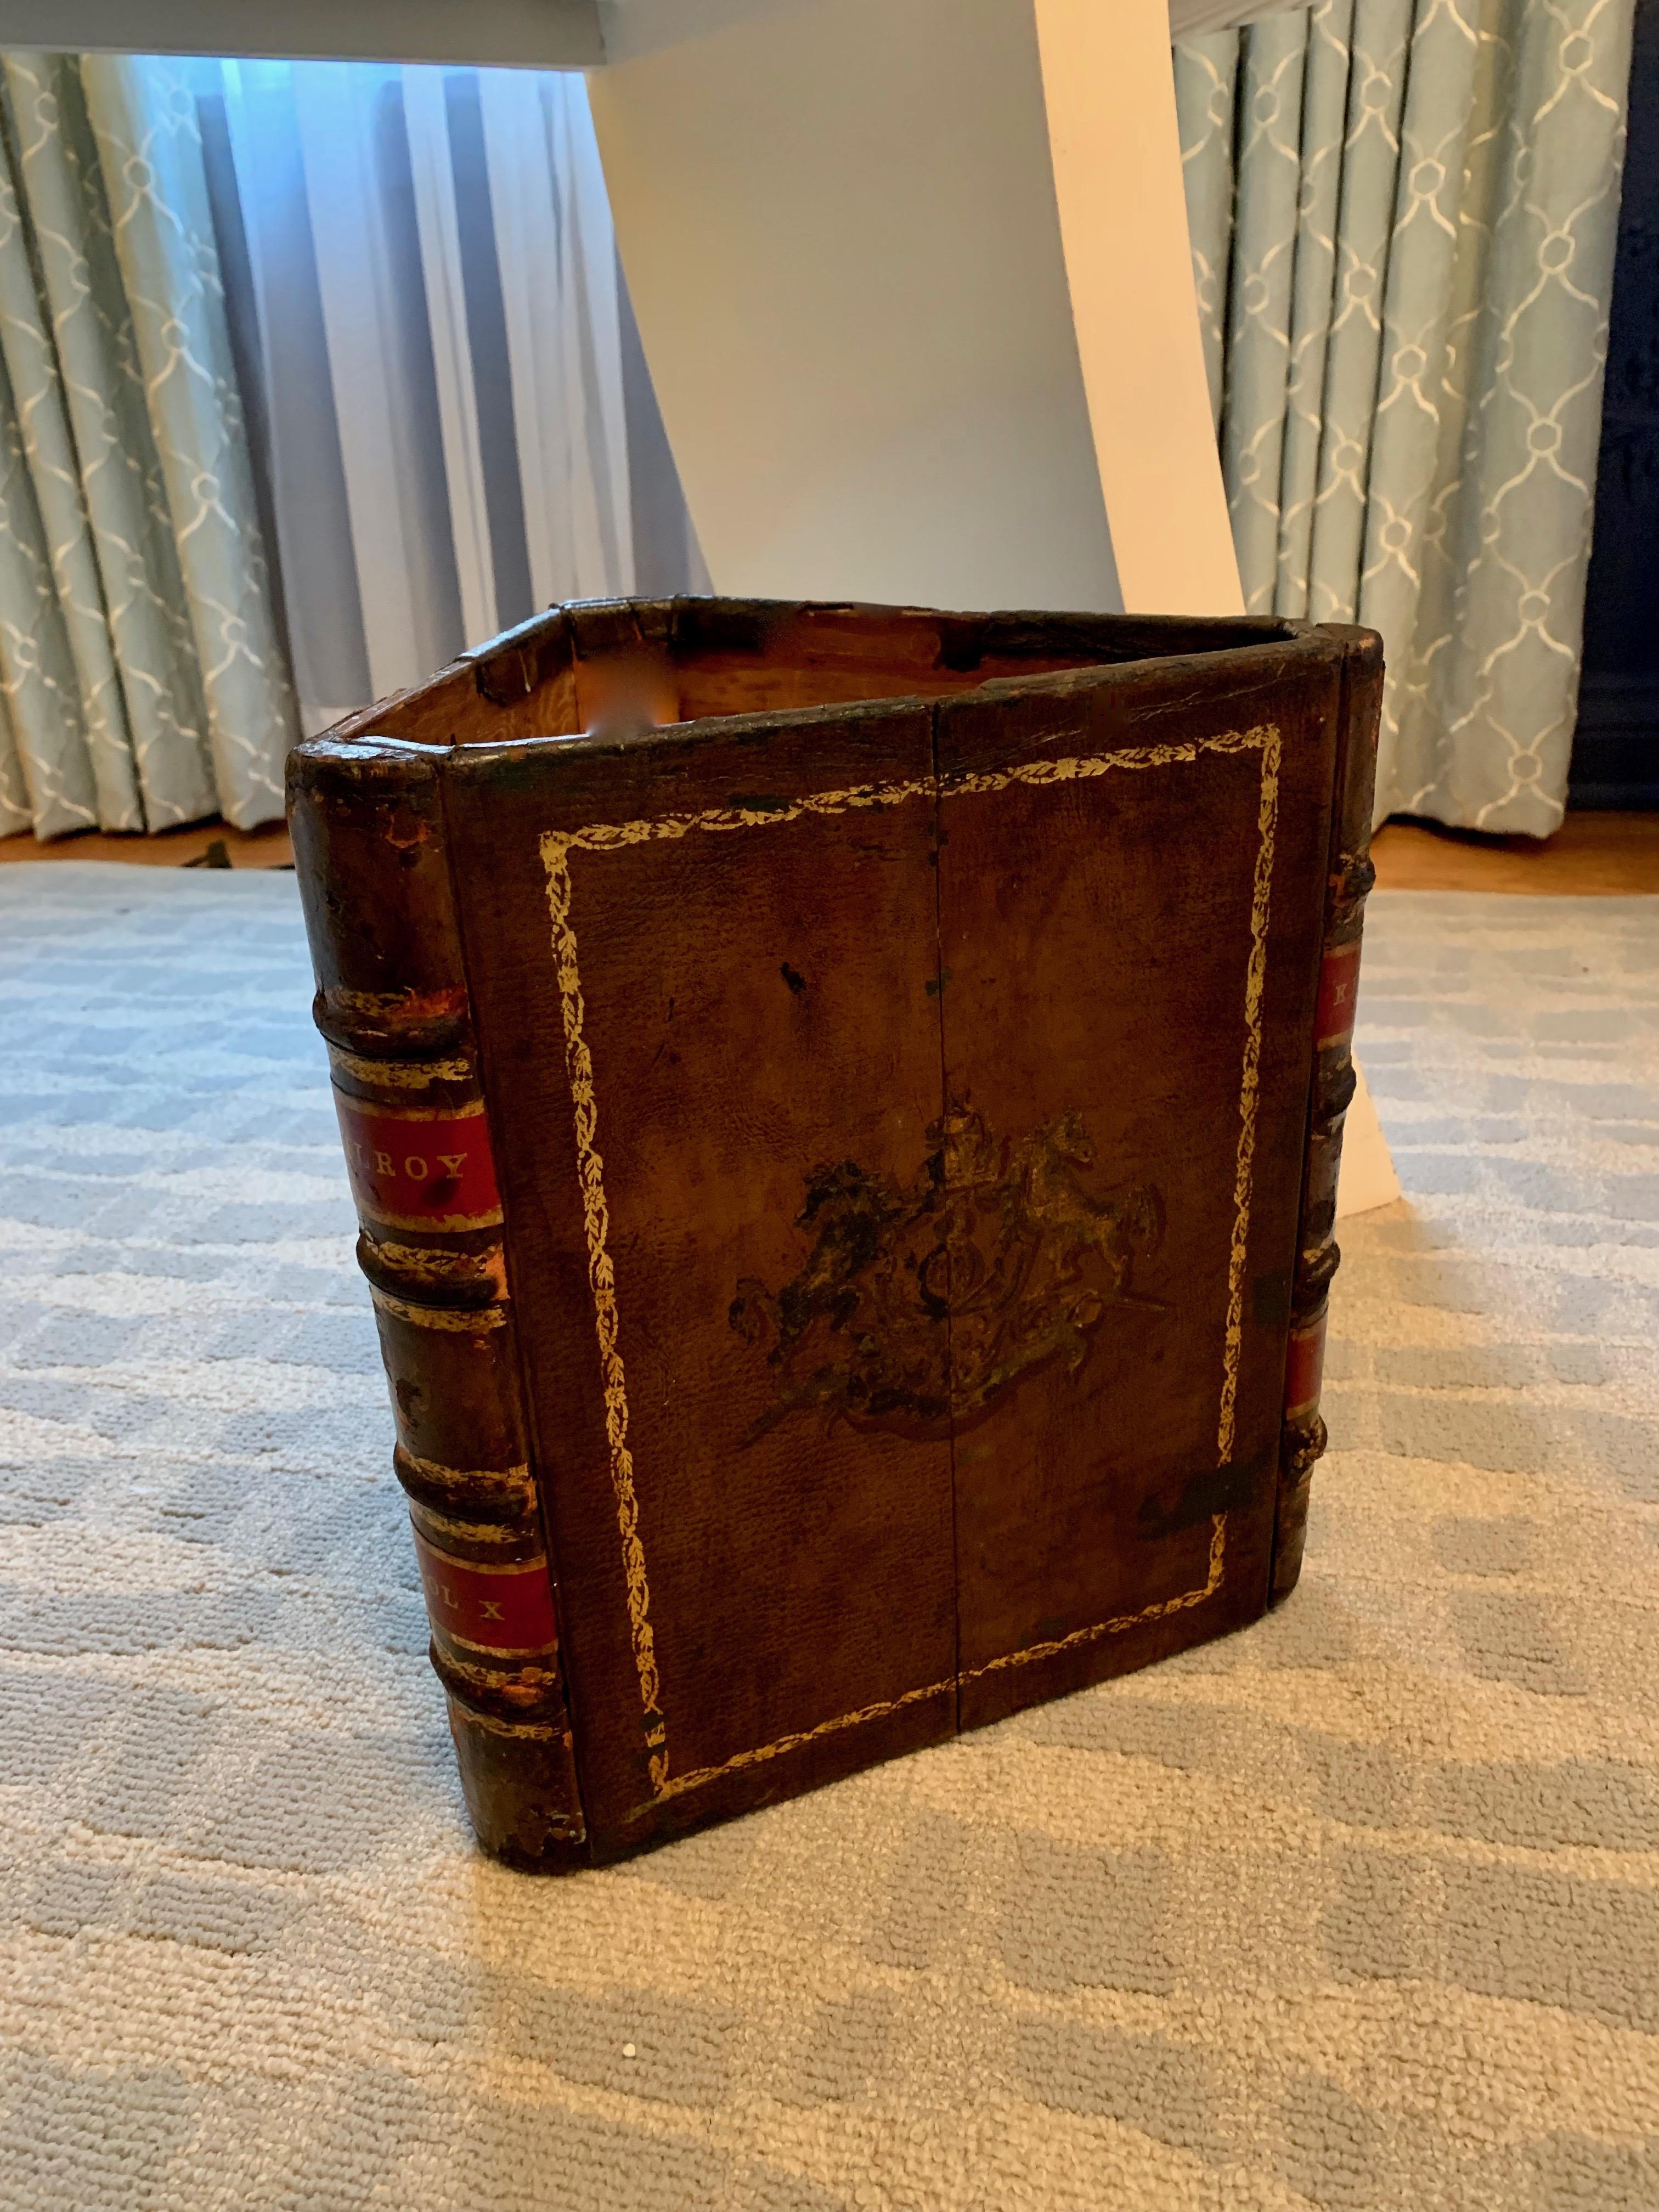 A handsome Italian leather waste basket in a triangle shape depicting leather bound books and is a perfect compliment to the professional or home office, den or library! Also a nice addition to the Childs room. The piece is beautifully patinated.